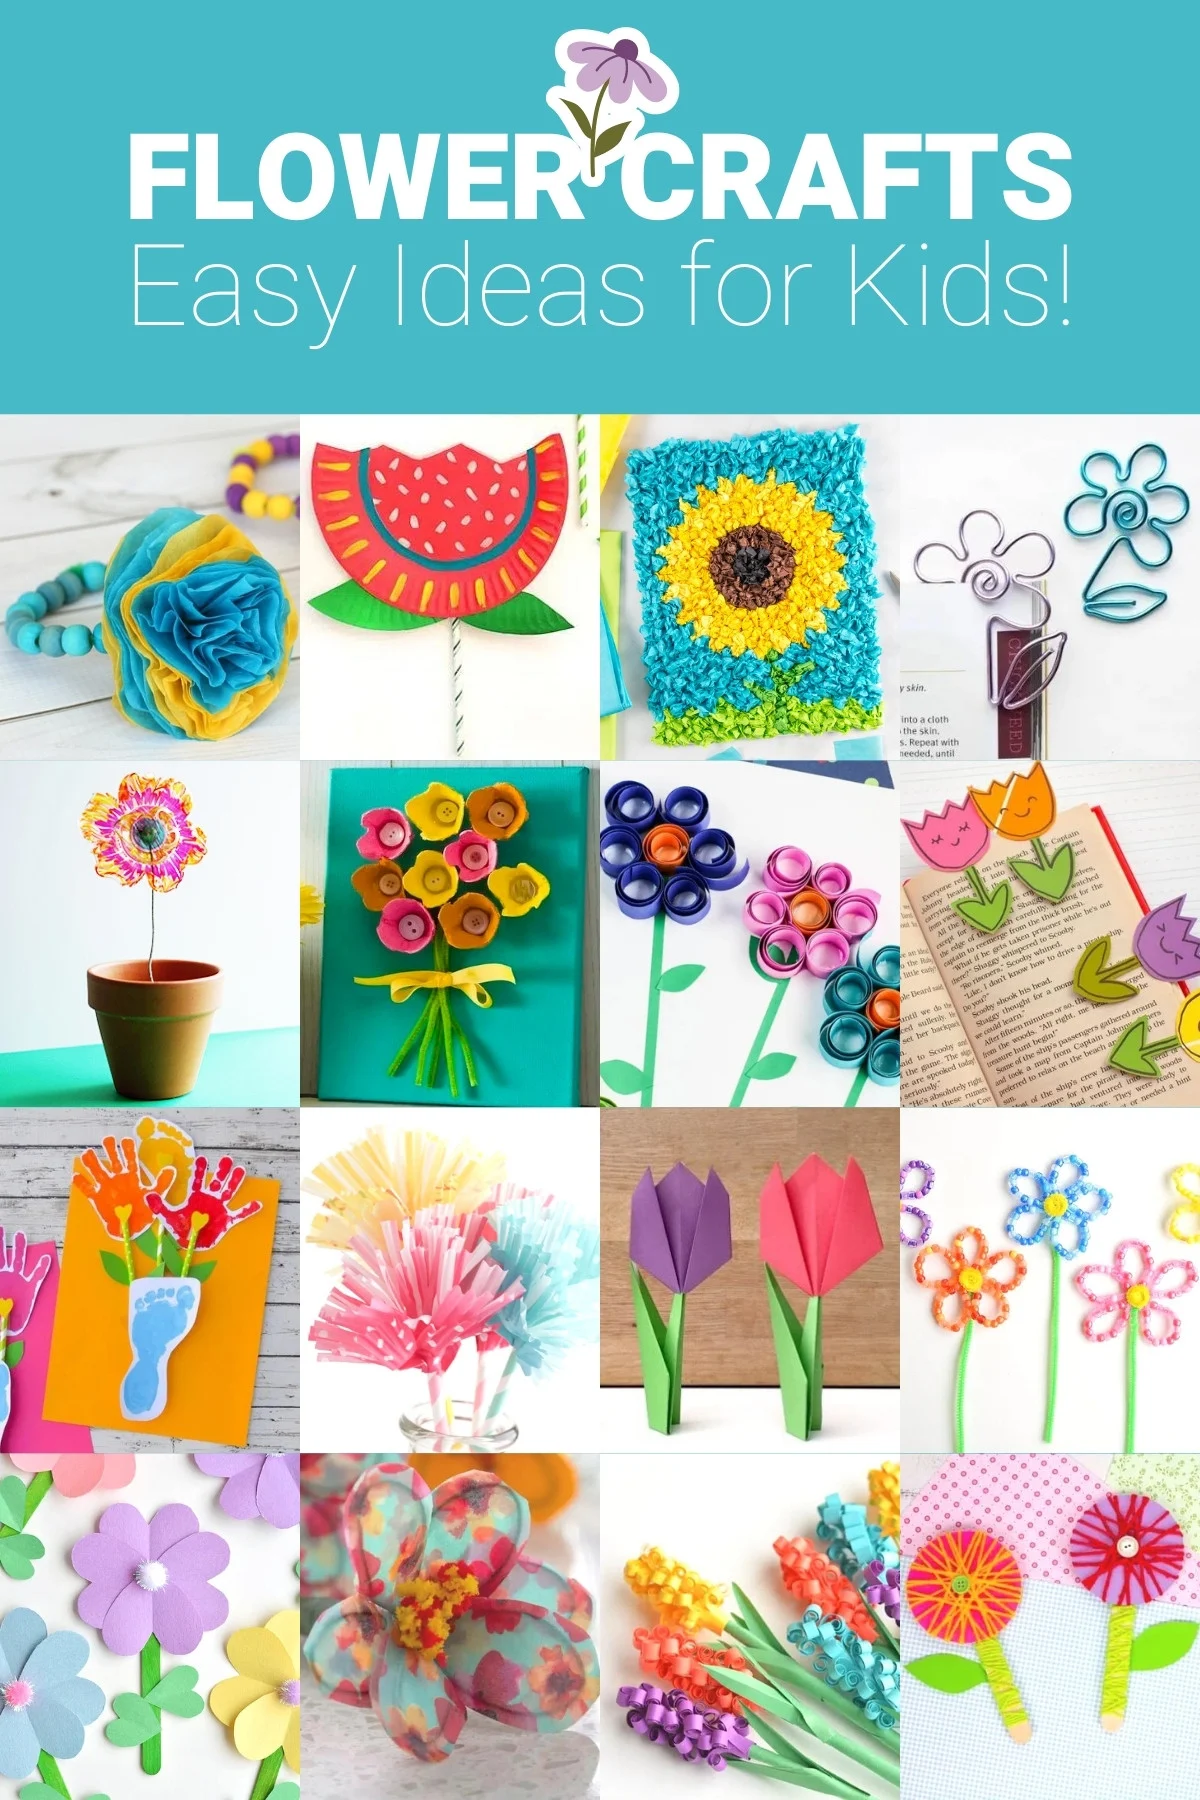 art and craft ideas for kids to make